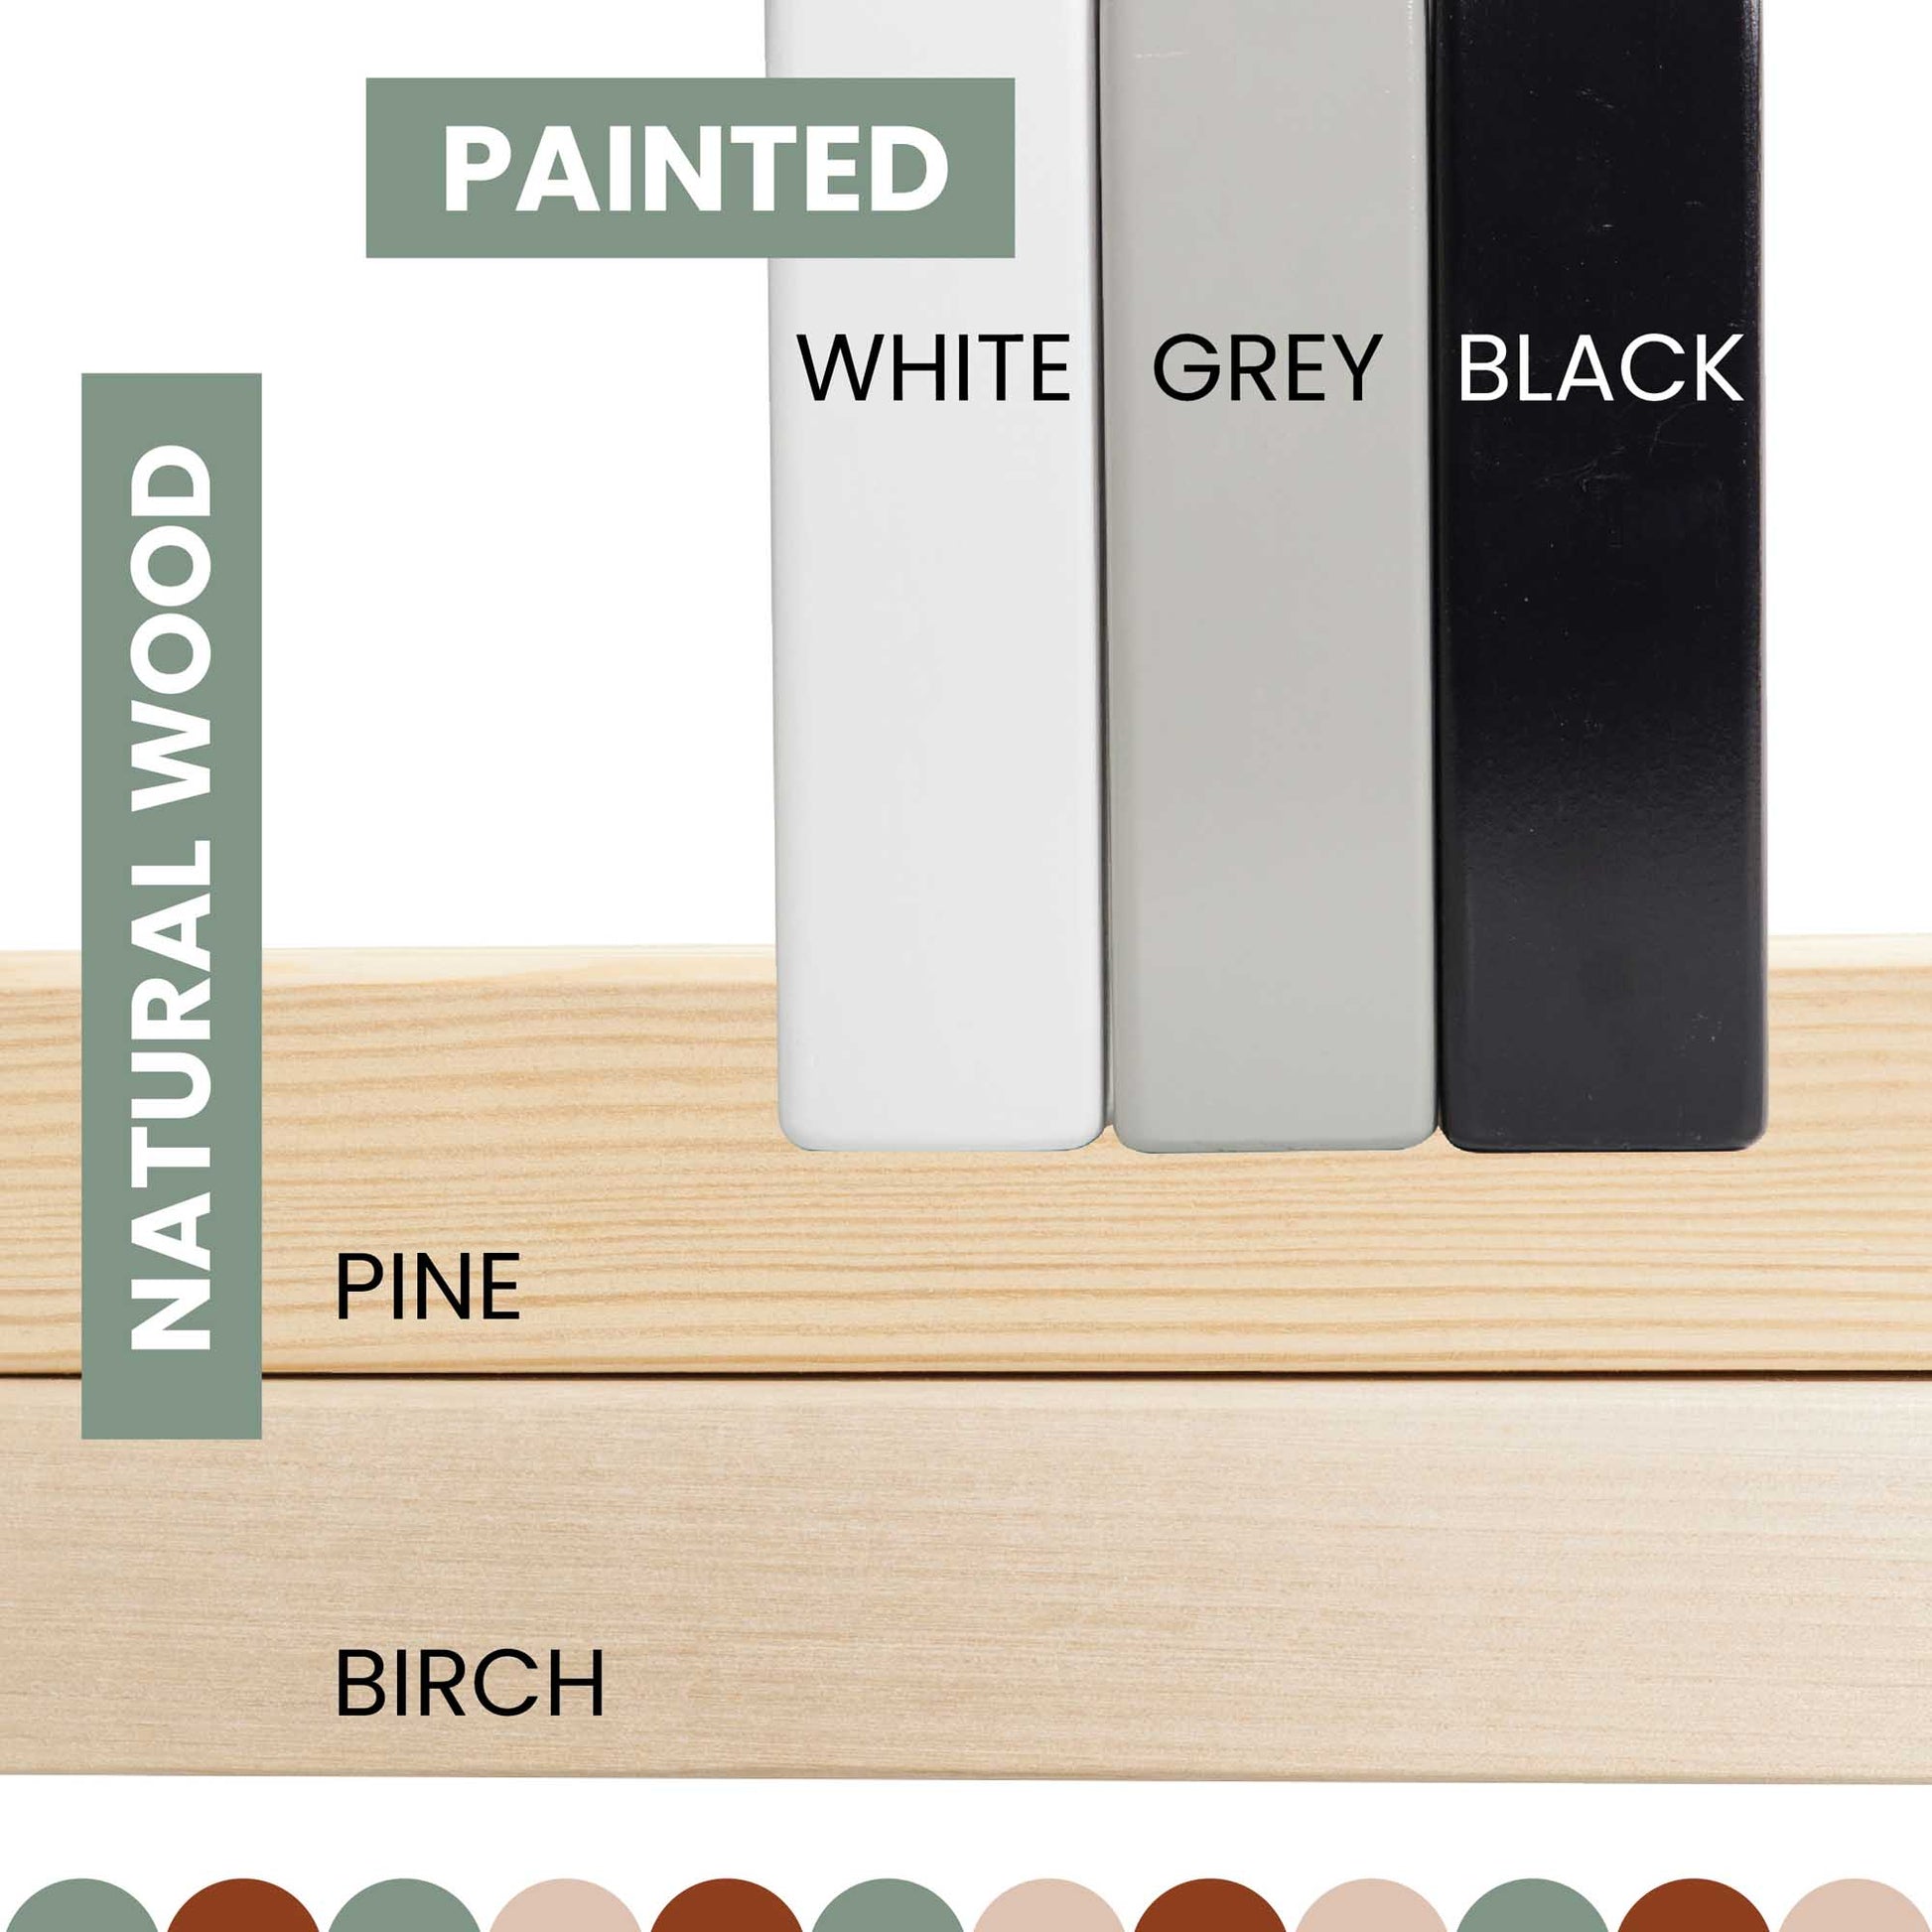 The Montessori house-frame bed with a picket fence headboard and footboard comes in a variety of paint colors suitable for pine, birch, and white wood.